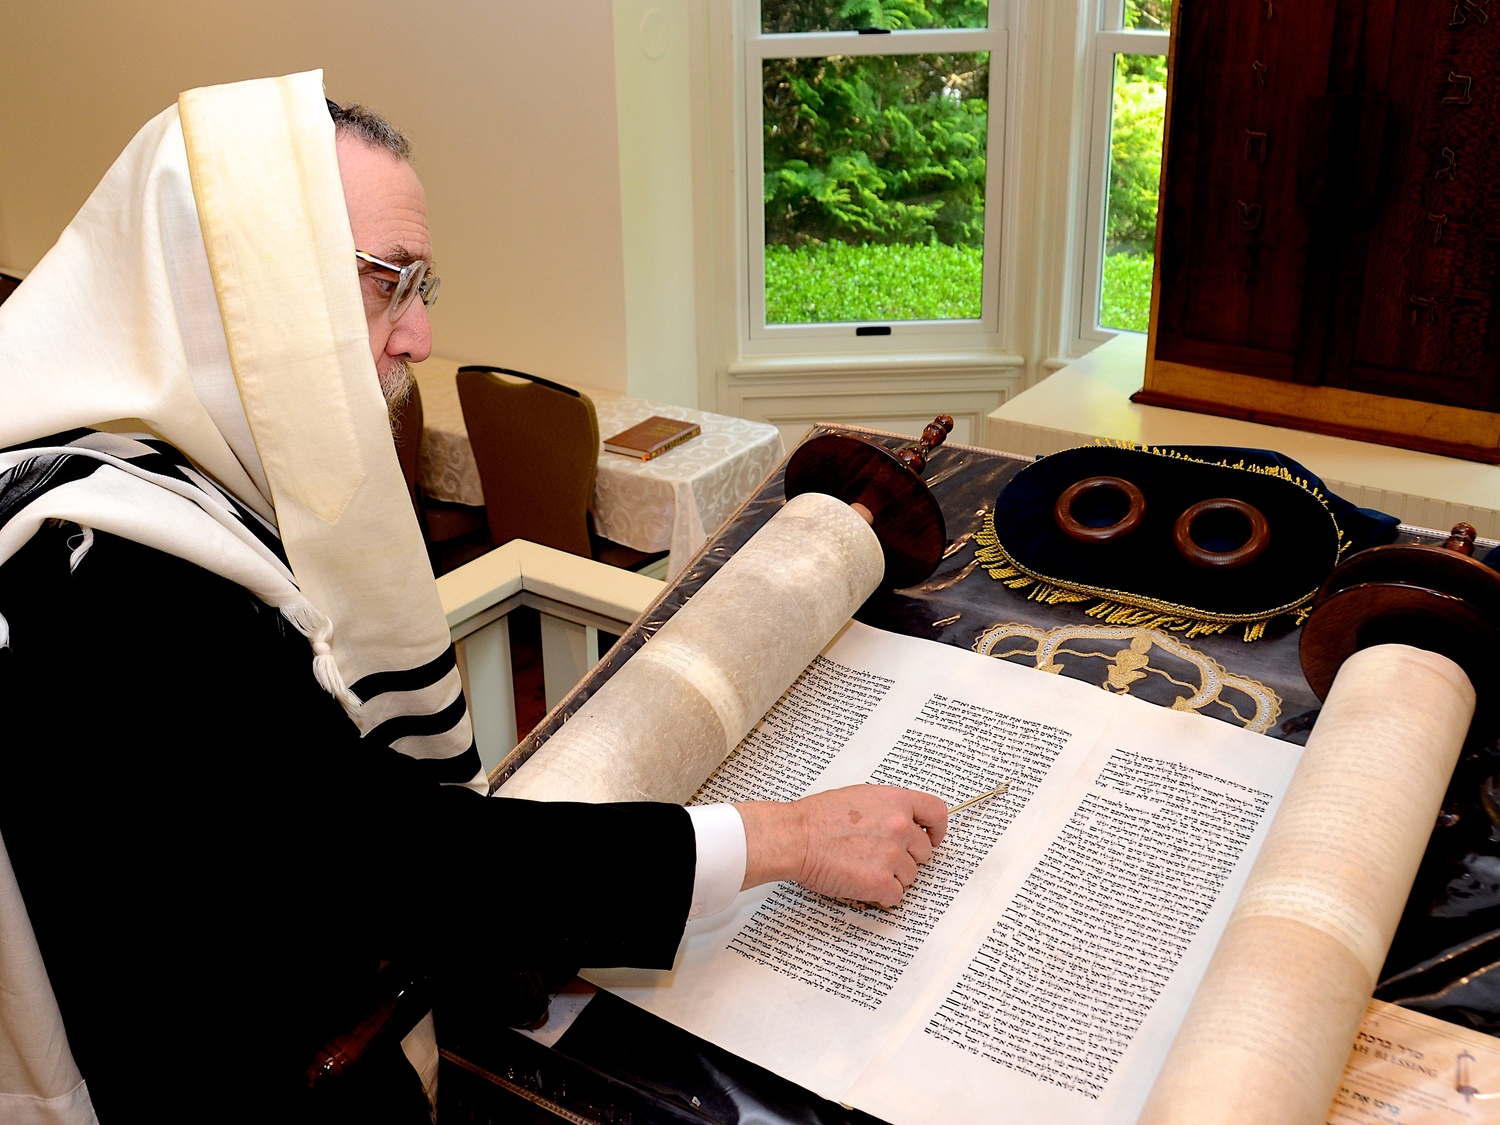 Chabad of the Hamptons Rabbi Leibel Baumgarten reads from the Torah. KYRIL BROMLEY